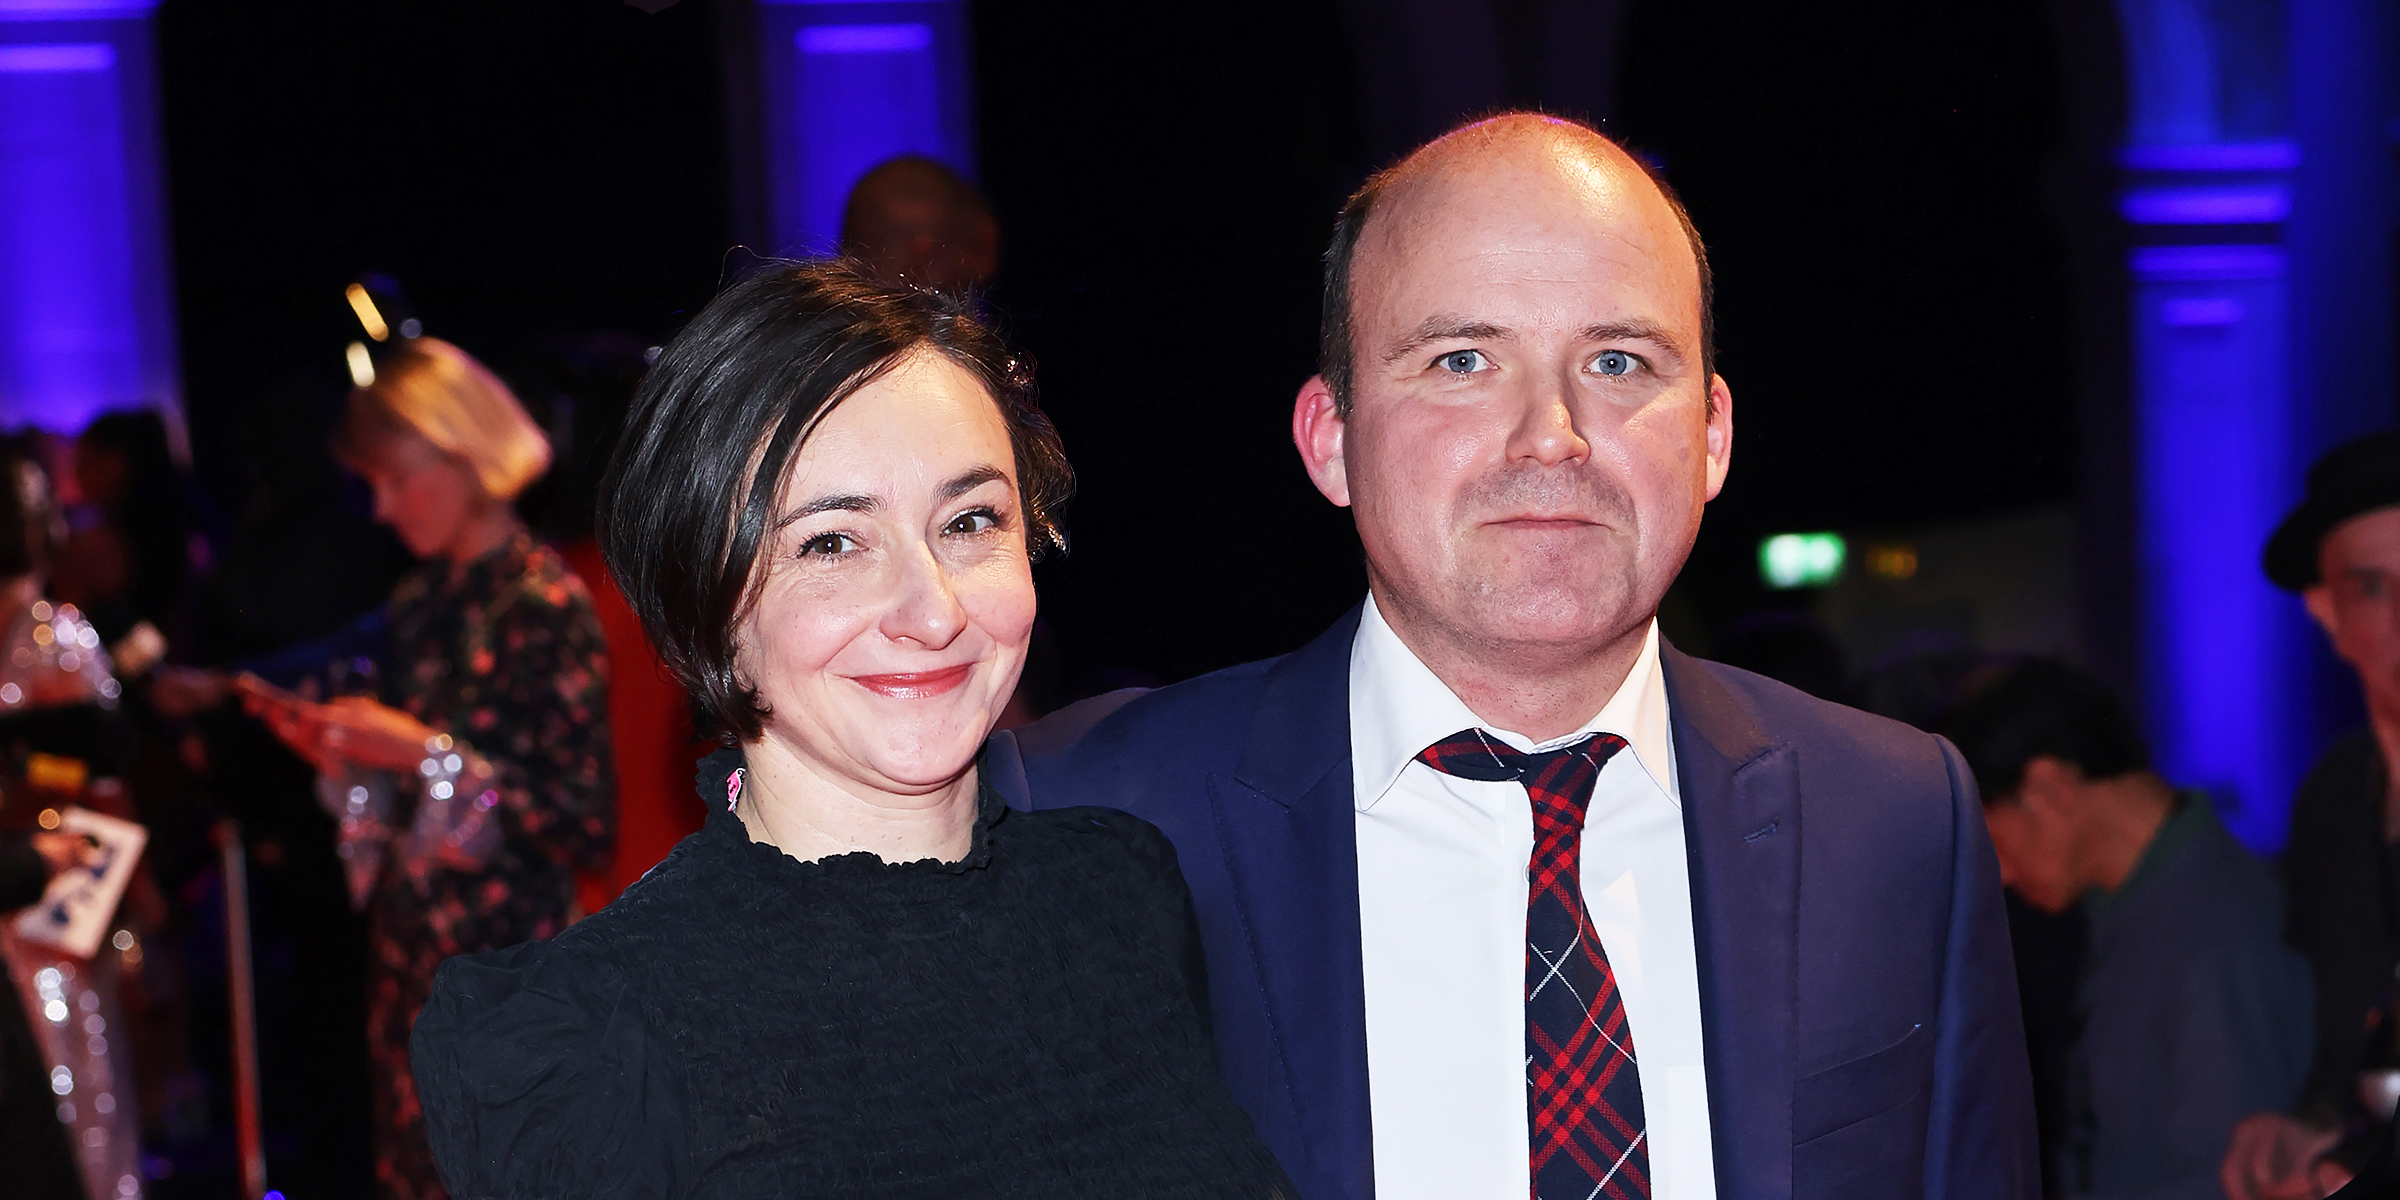 Pandora Colin and Rory Kinnear | Source: Getty Images